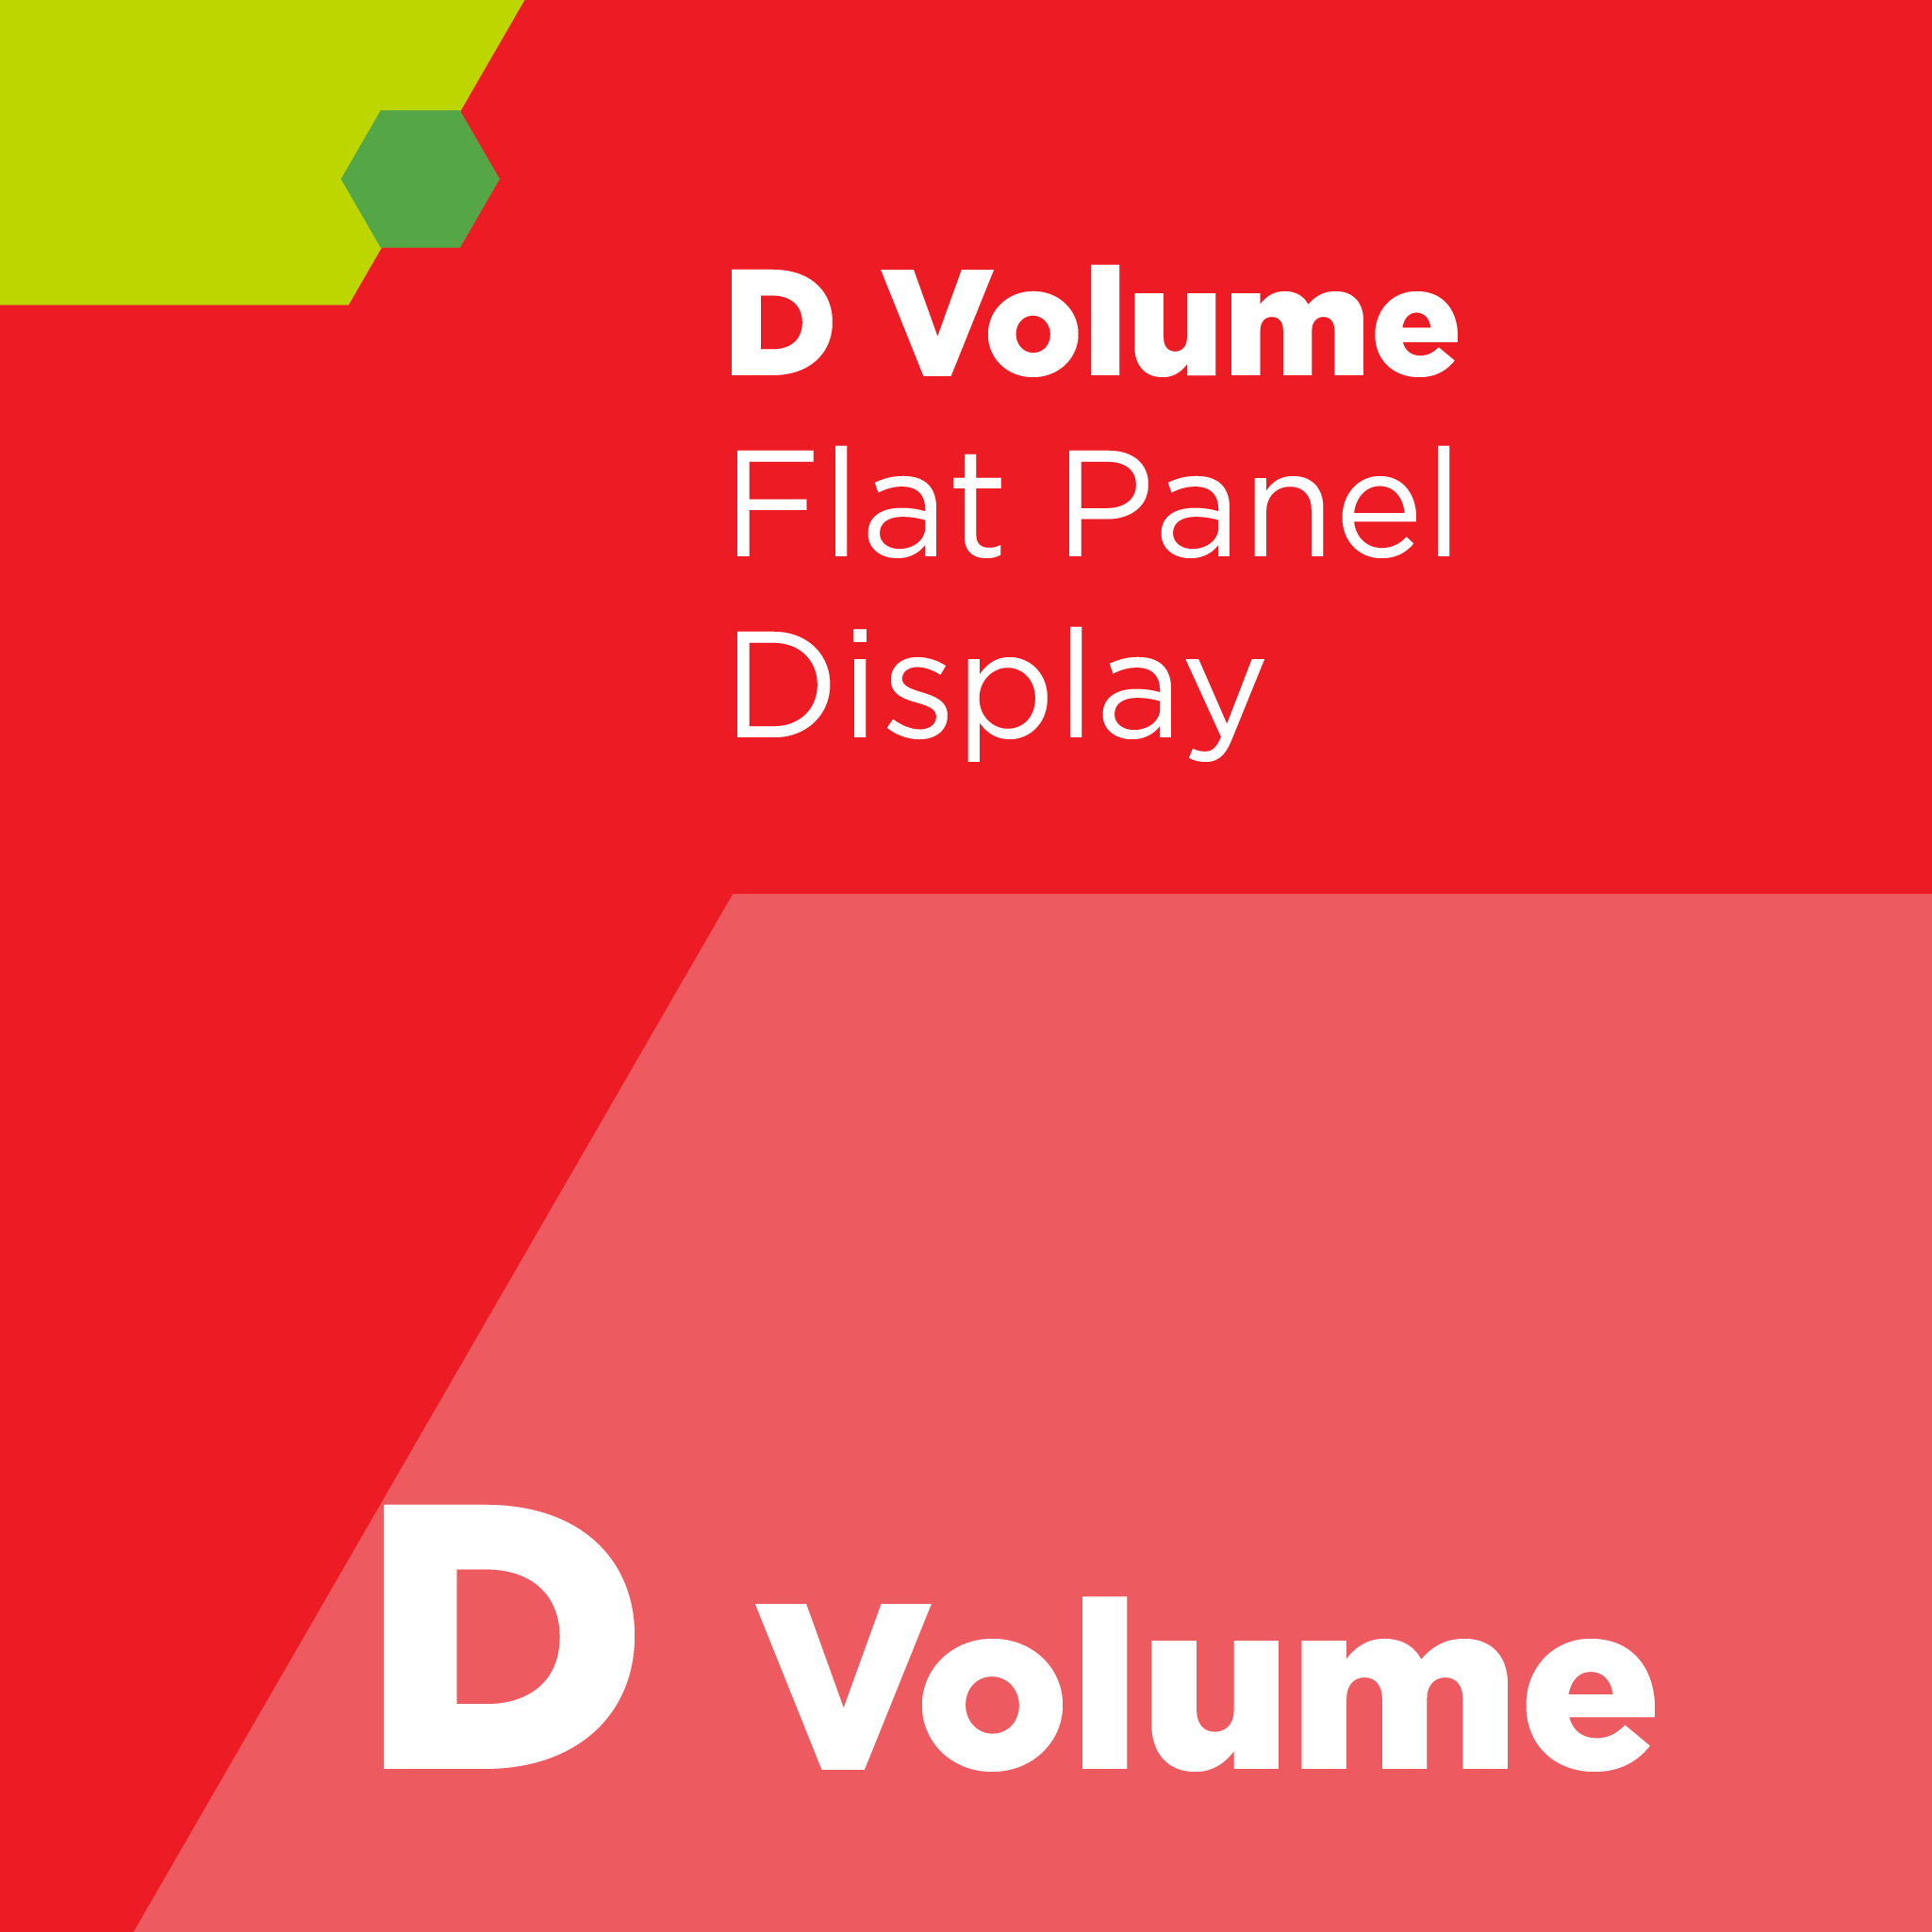 D00300 - SEMI D3 - Quality Area Specification for Flat Panel Display Substrates